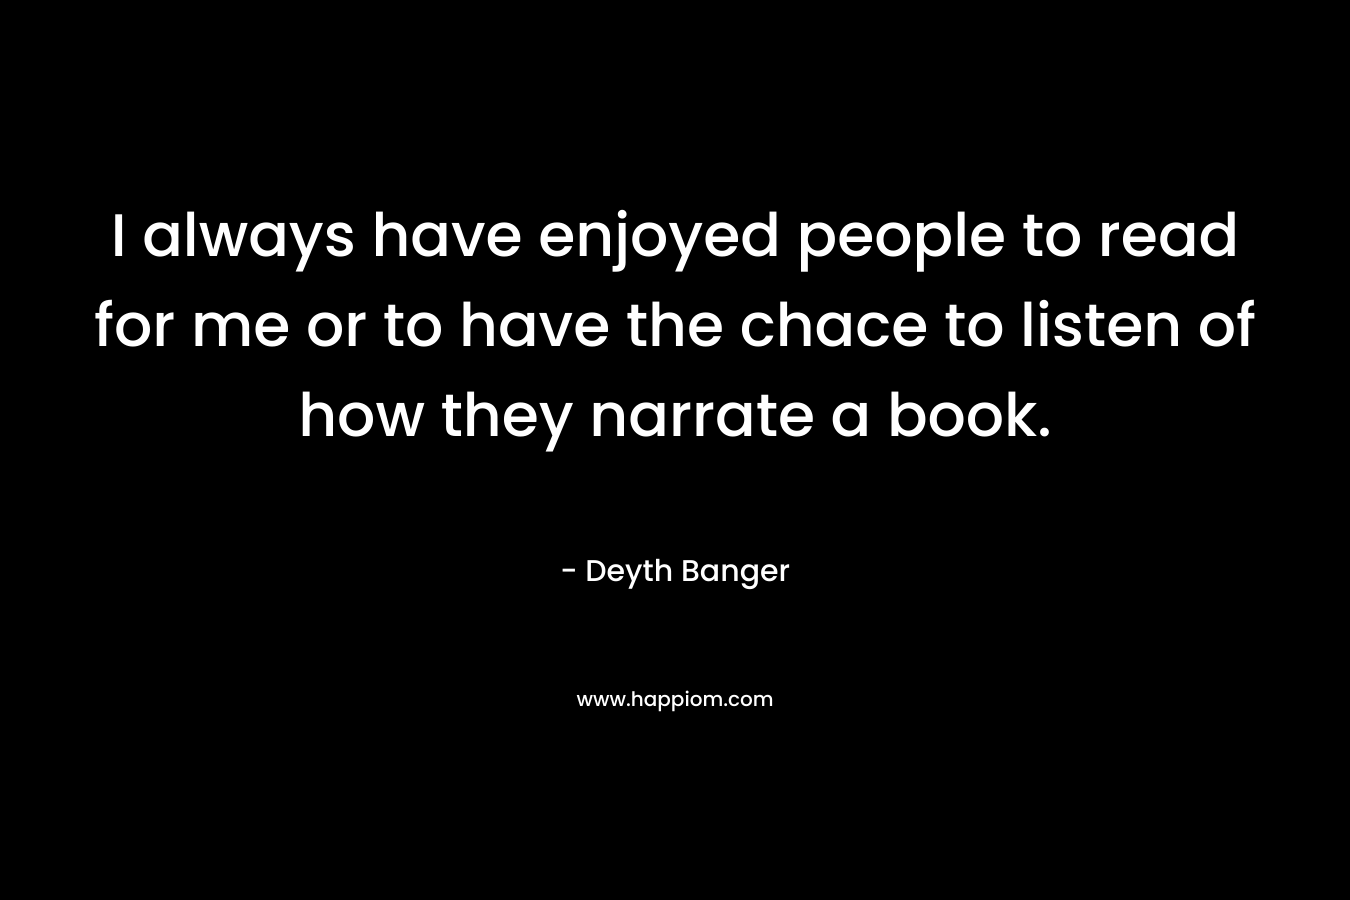 I always have enjoyed people to read for me or to have the chace to listen of how they narrate a book. – Deyth Banger